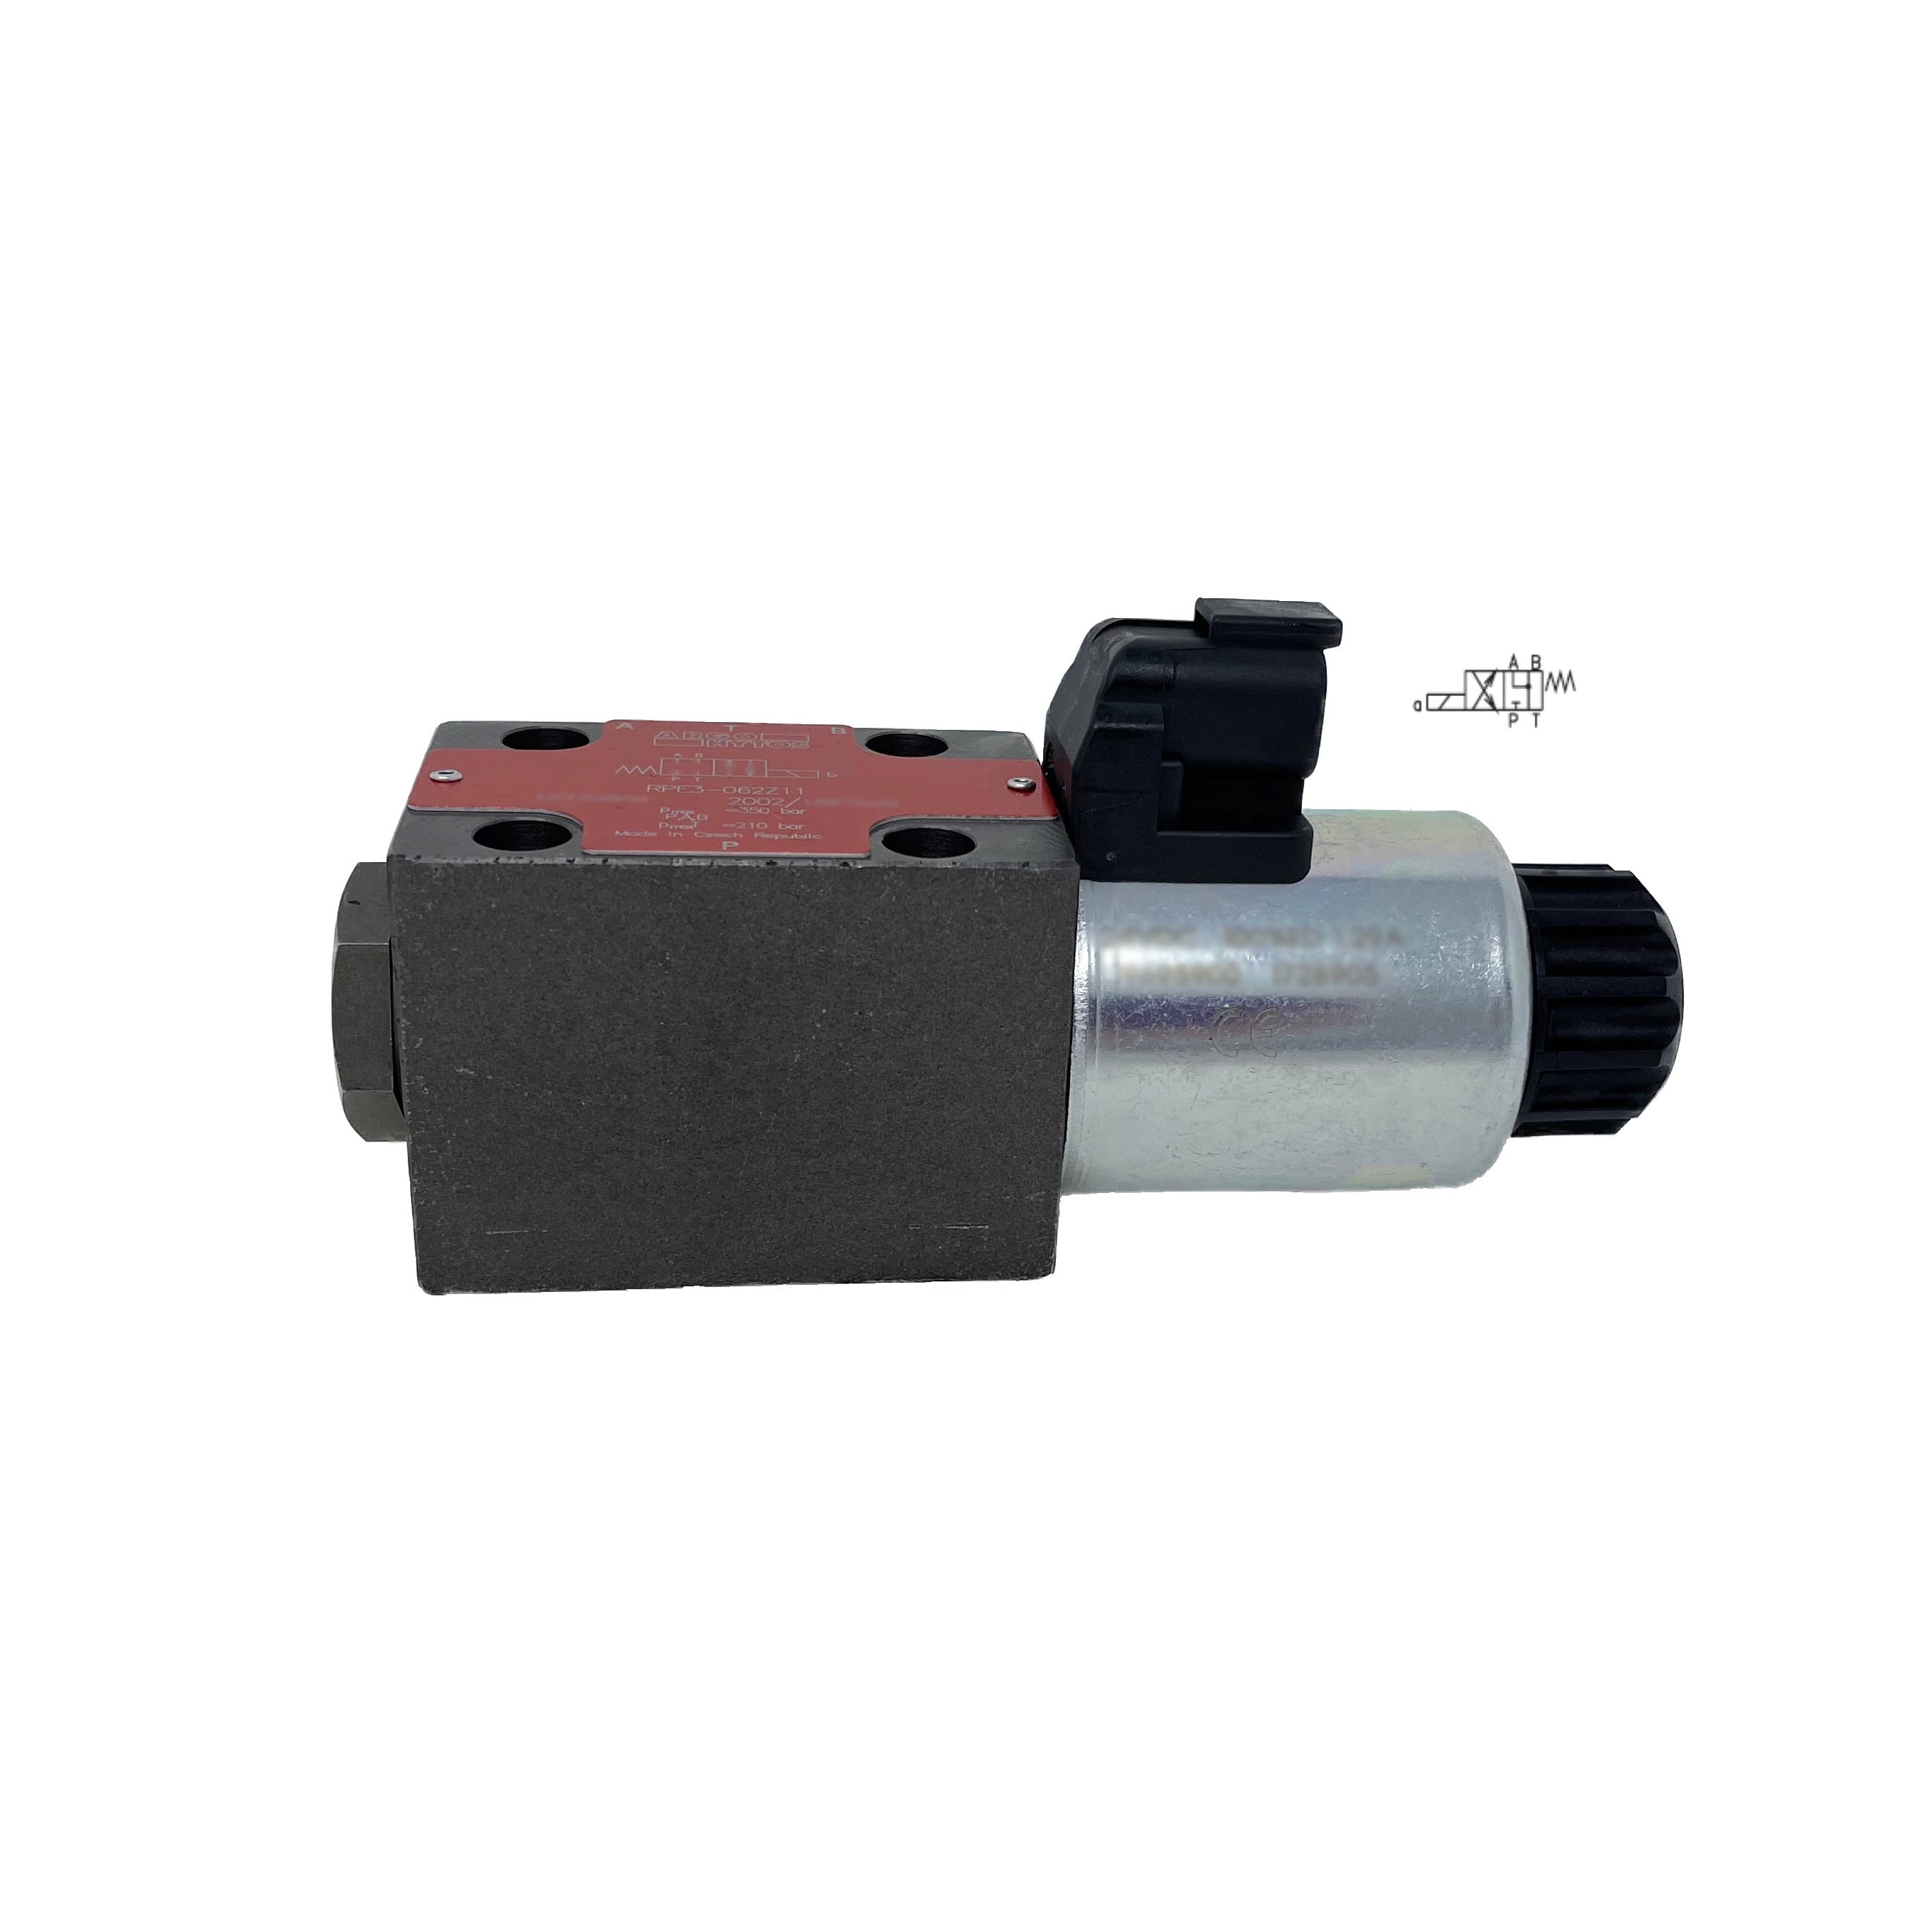 RPE3-062Y51/01200E12A : Argo Hytos Directional Control Valve, D03 (NG6), 21GPM, 5100psi, 2P4W, 12 VDC, Deutsch, Spring Return, Motor Spool in Neutral, Coil Side A